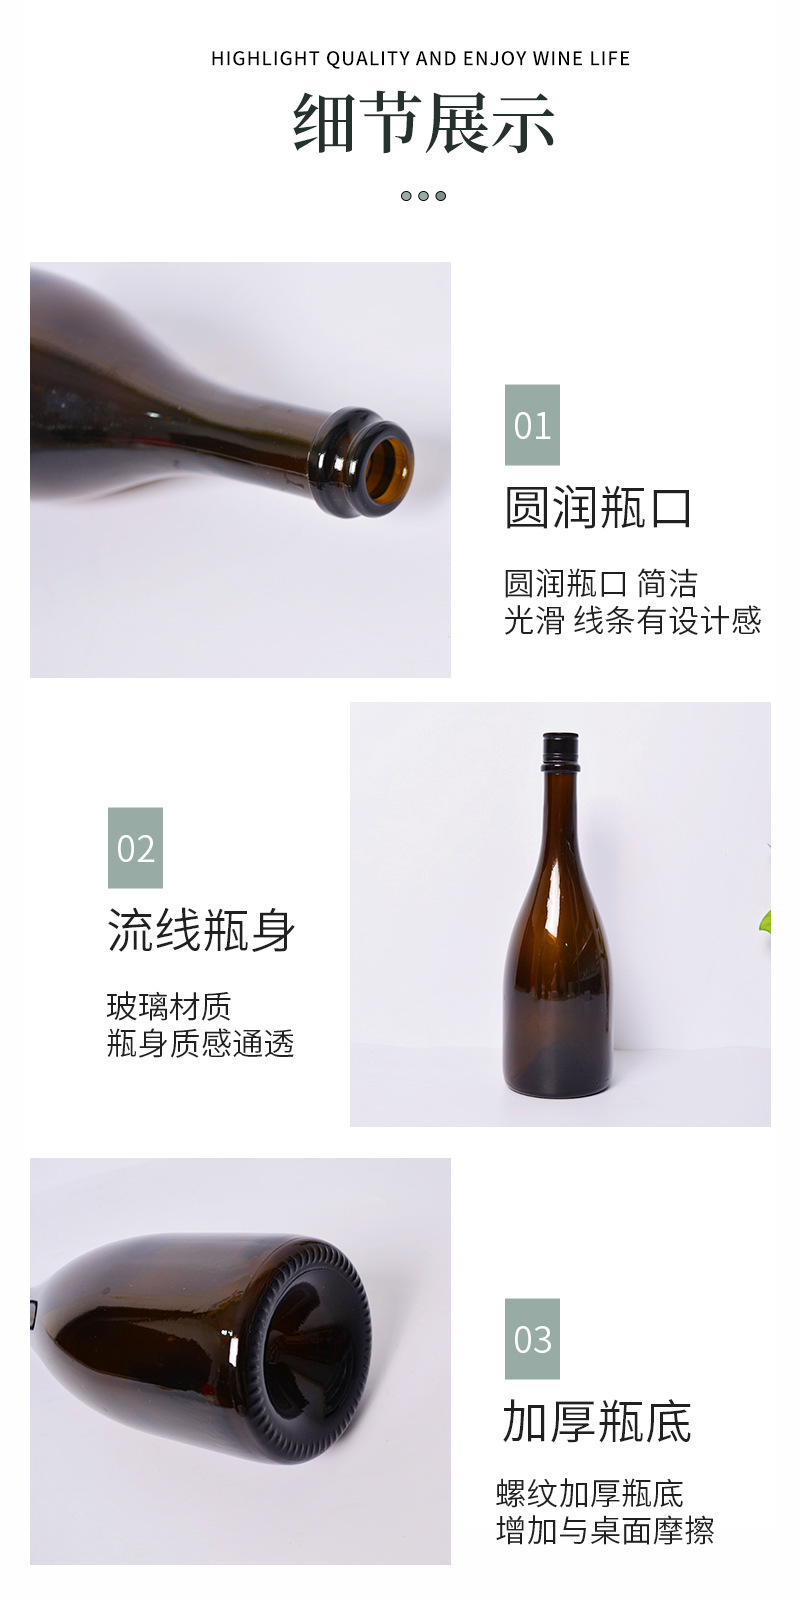 Cross border customized 750ml foreign wine glass bottle empty wine bottle red wine bottle Wine bottle brown big belly champagne bottle